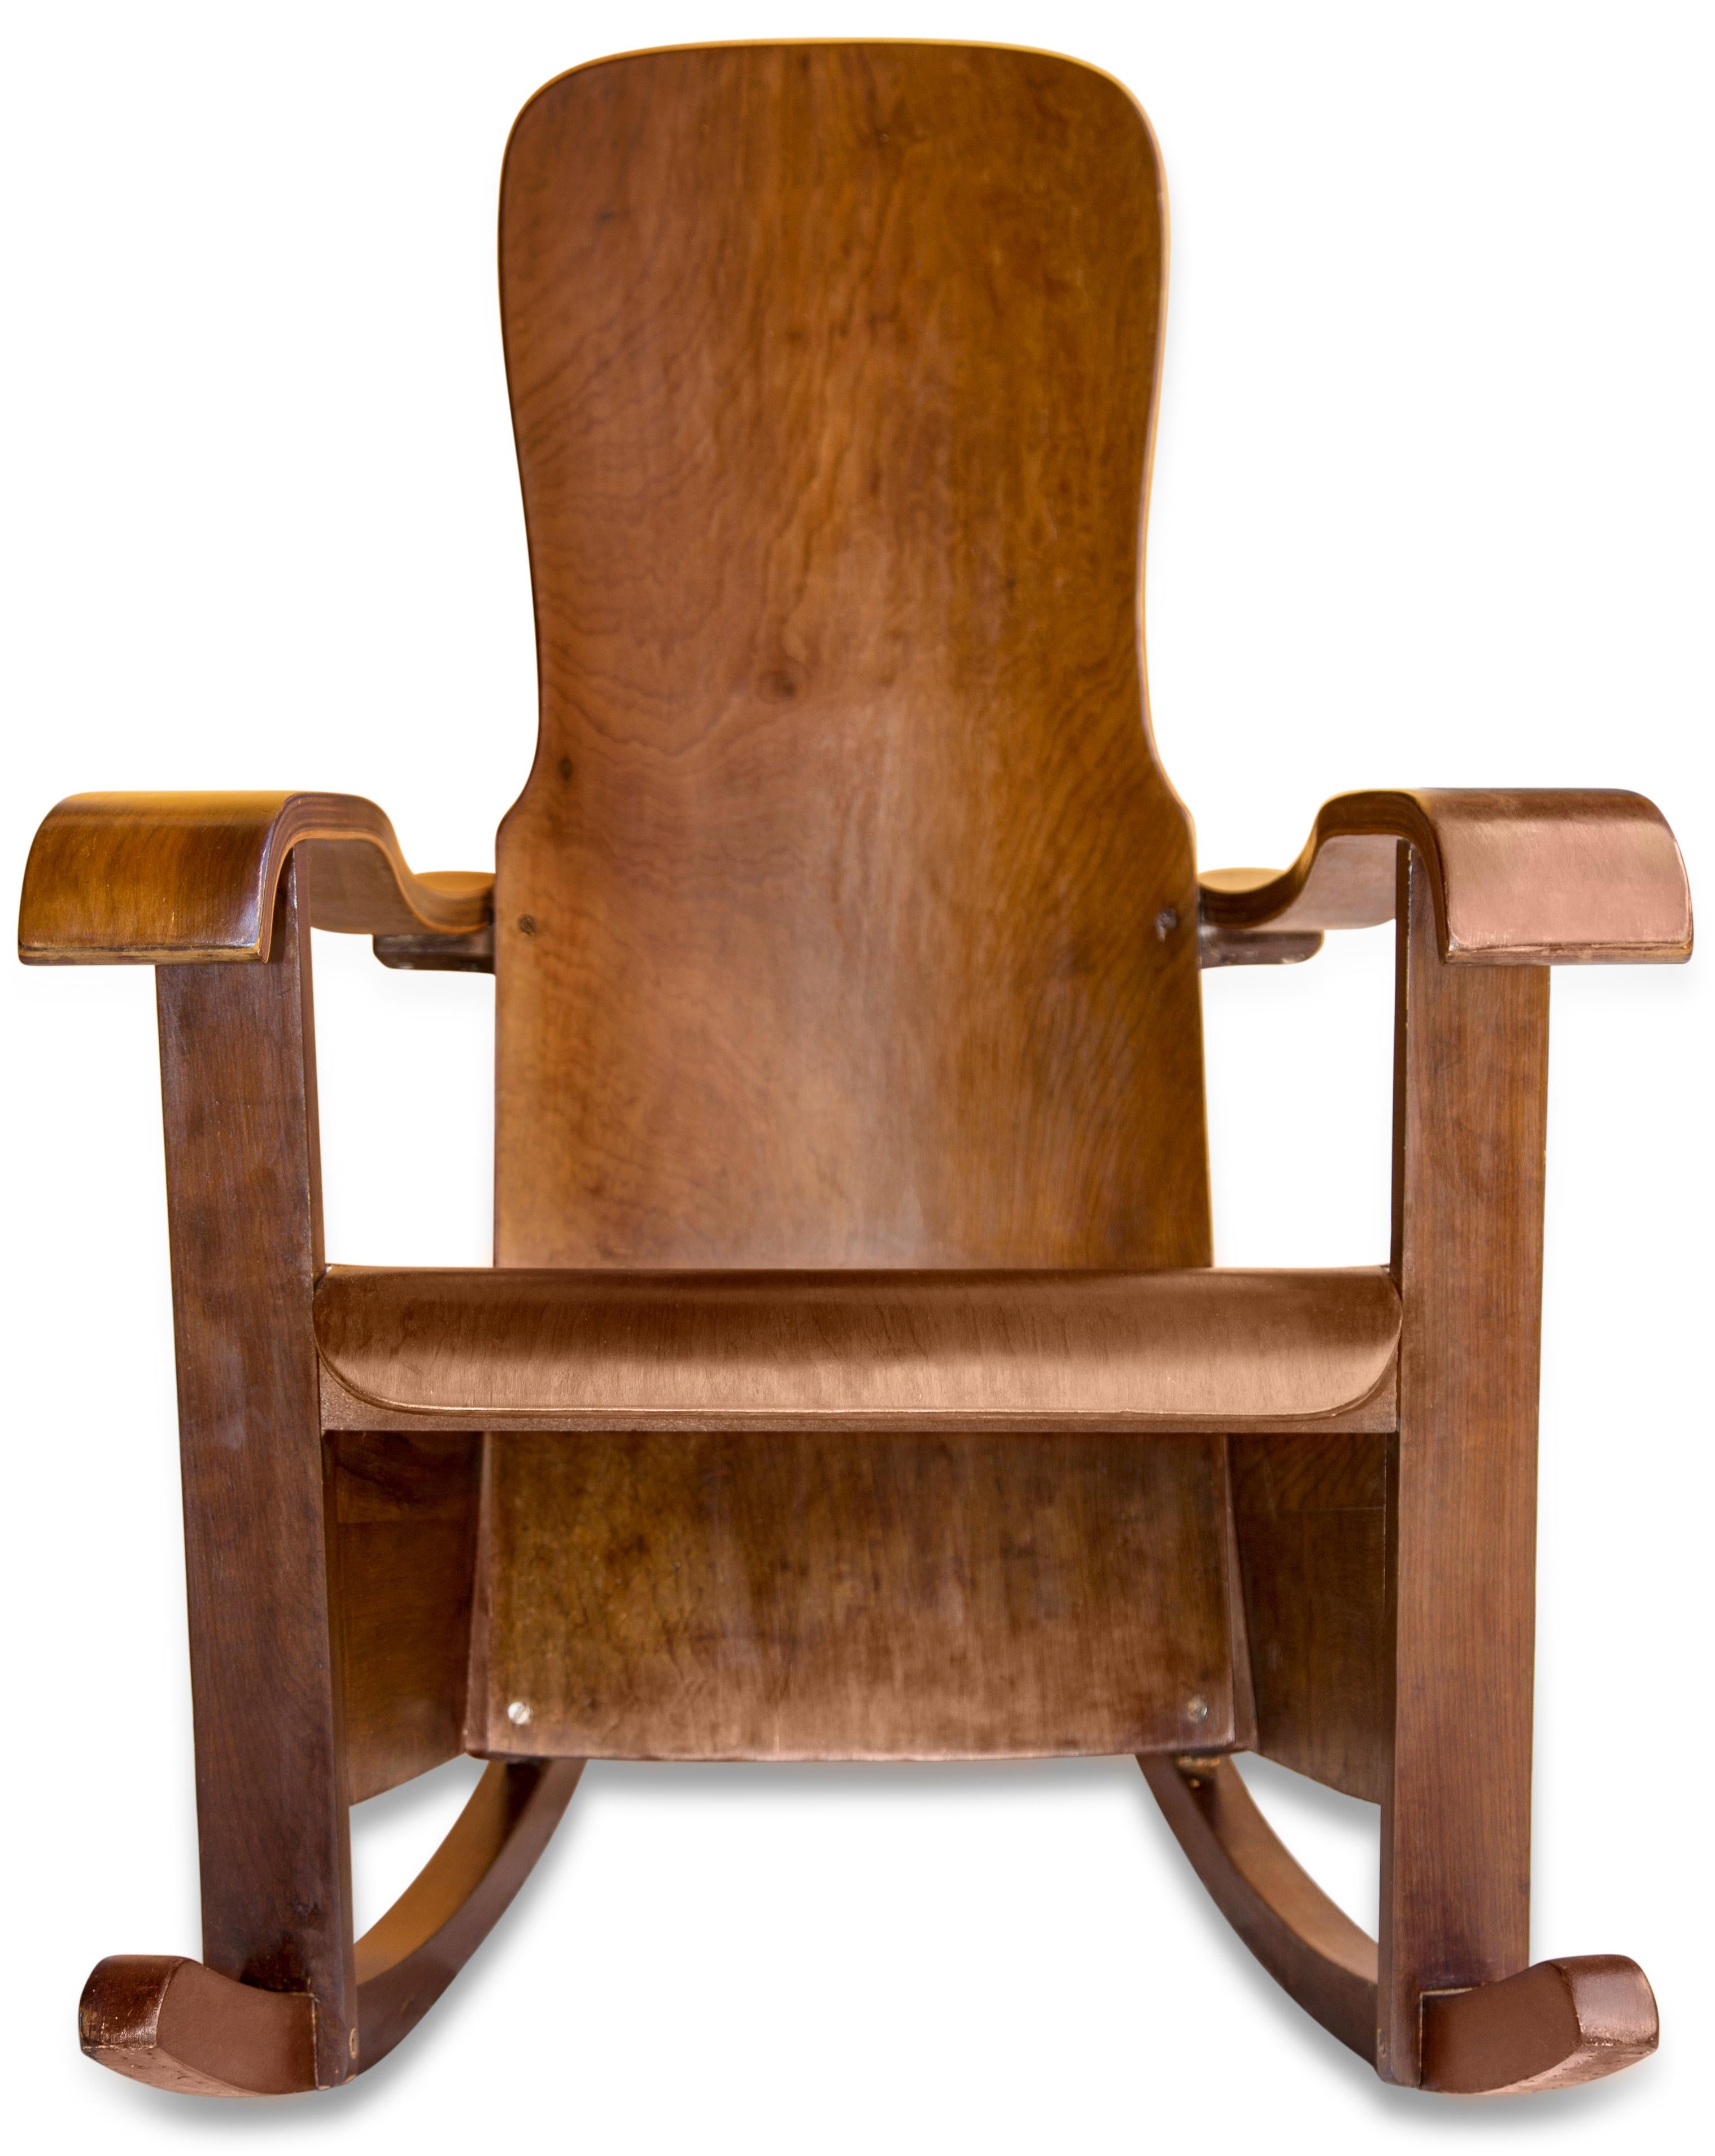 Brazilian Modern Rocking Chair in Bentwood by Moveis Cimo, 1950, Brazil In Good Condition For Sale In New York, NY